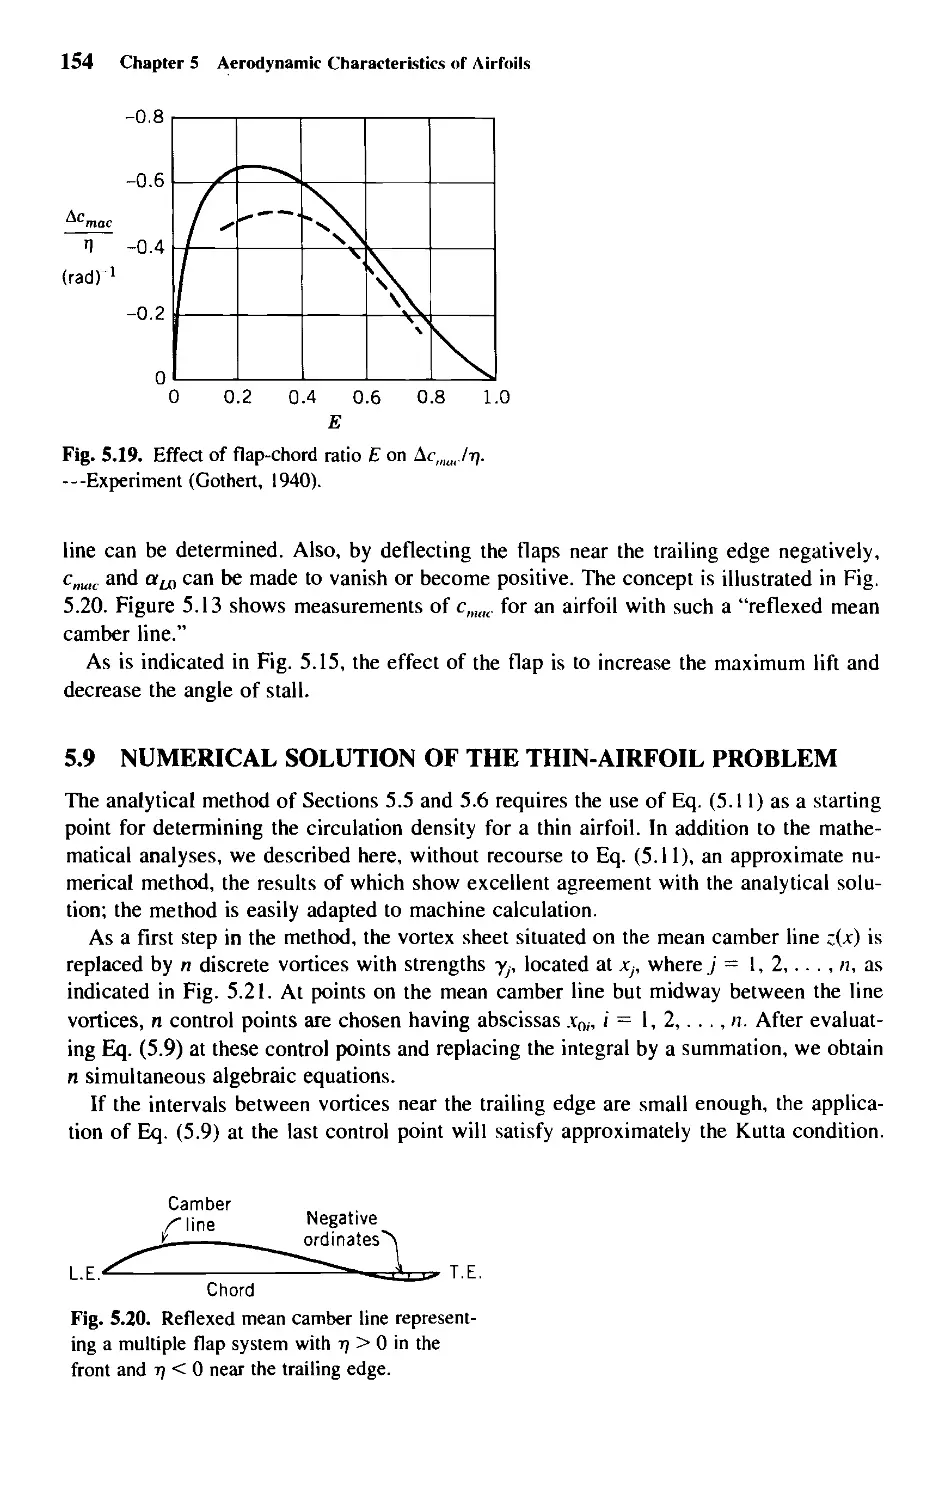 5.9 - Numerical Solution of the Thin-Airfoil Problem